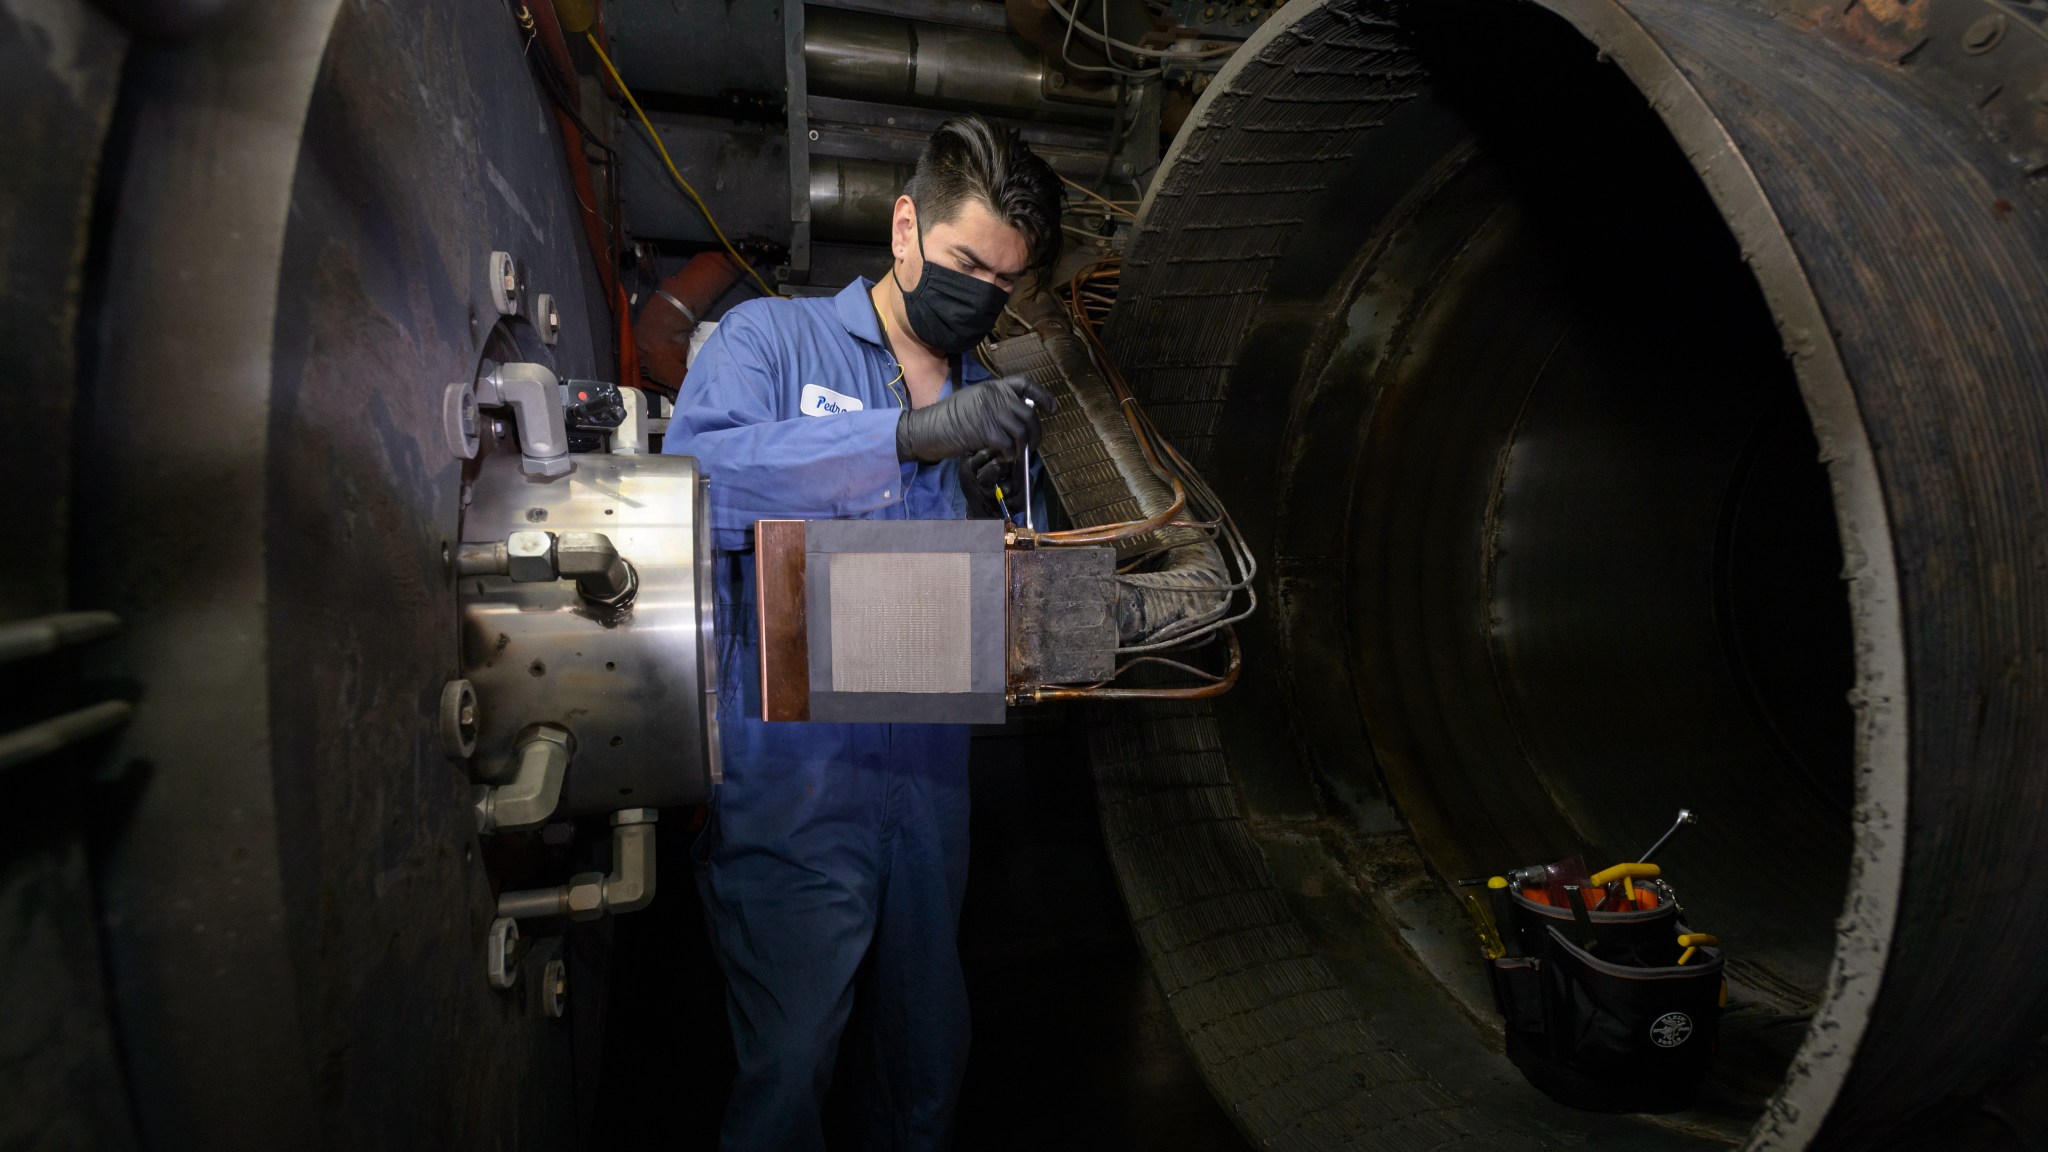 A man in a blue jumpsuit and black gloves and mask installs an object on a metal arm in front of the opening to a large tunnel on the right in which a toolbox sits.